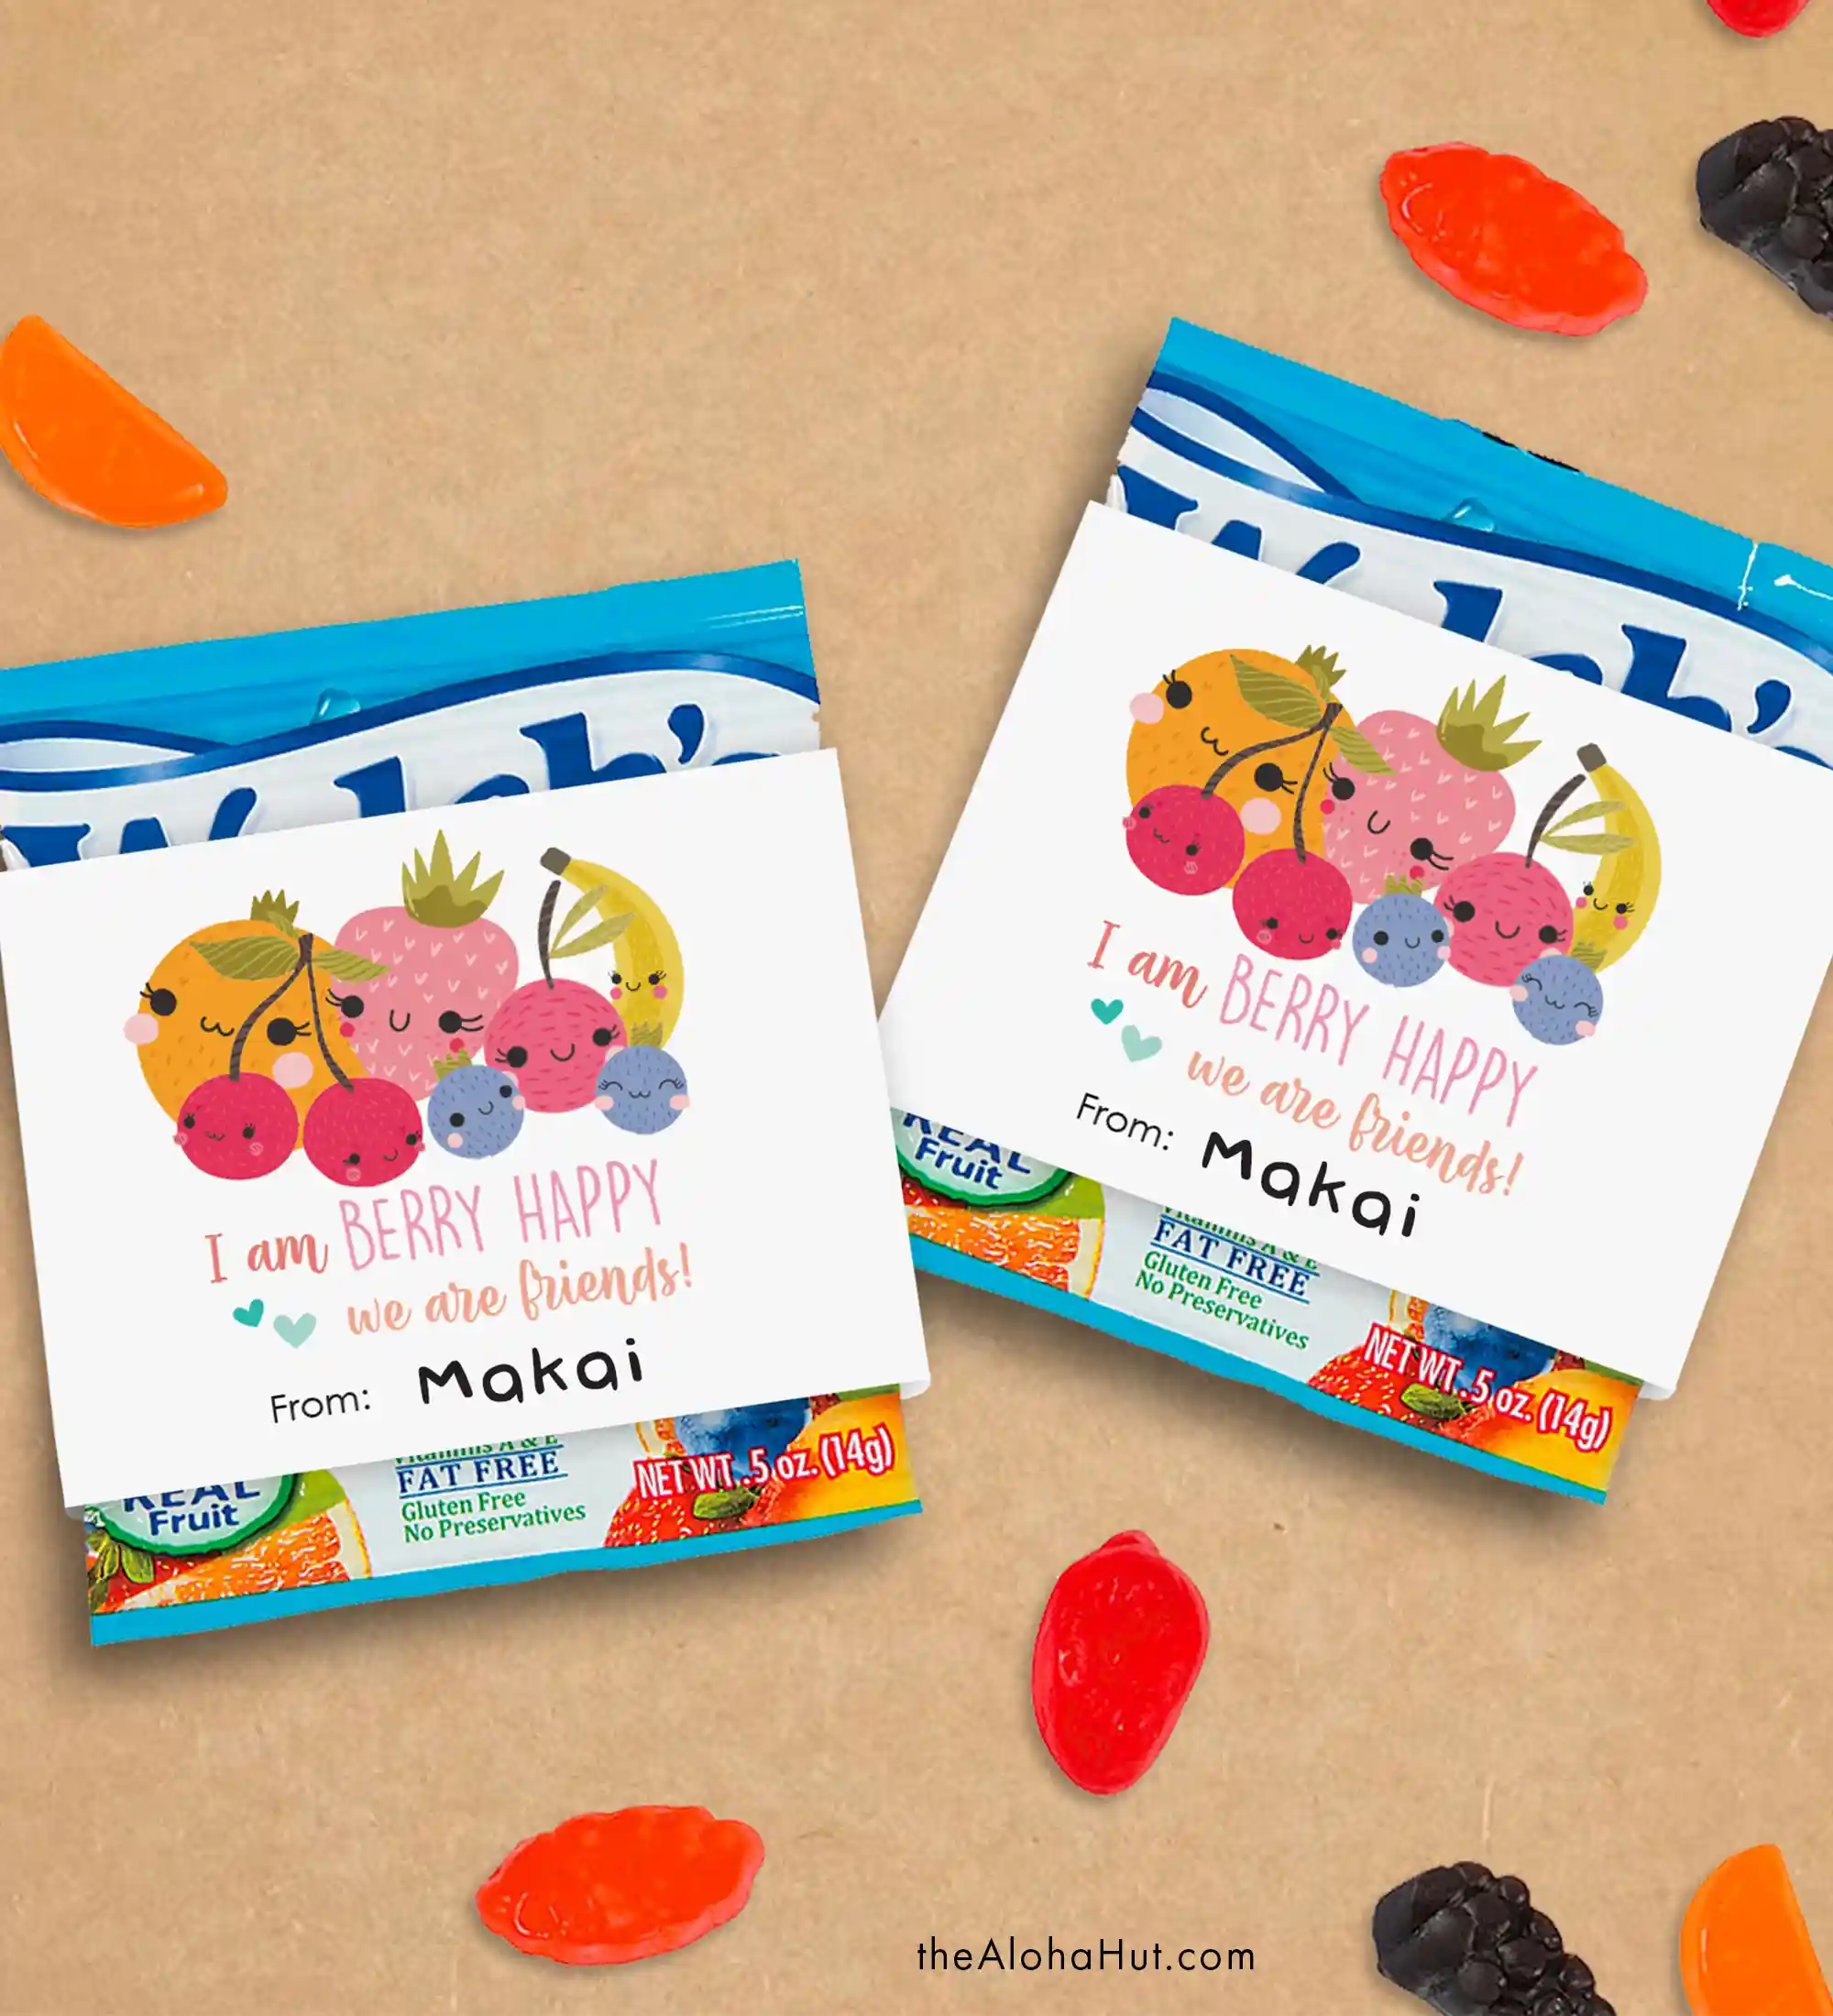 Fun & Easy Kids Valentine's Day Card Ideas - Fruit Snack Valentine, I Am Berry Happy We Are Friends